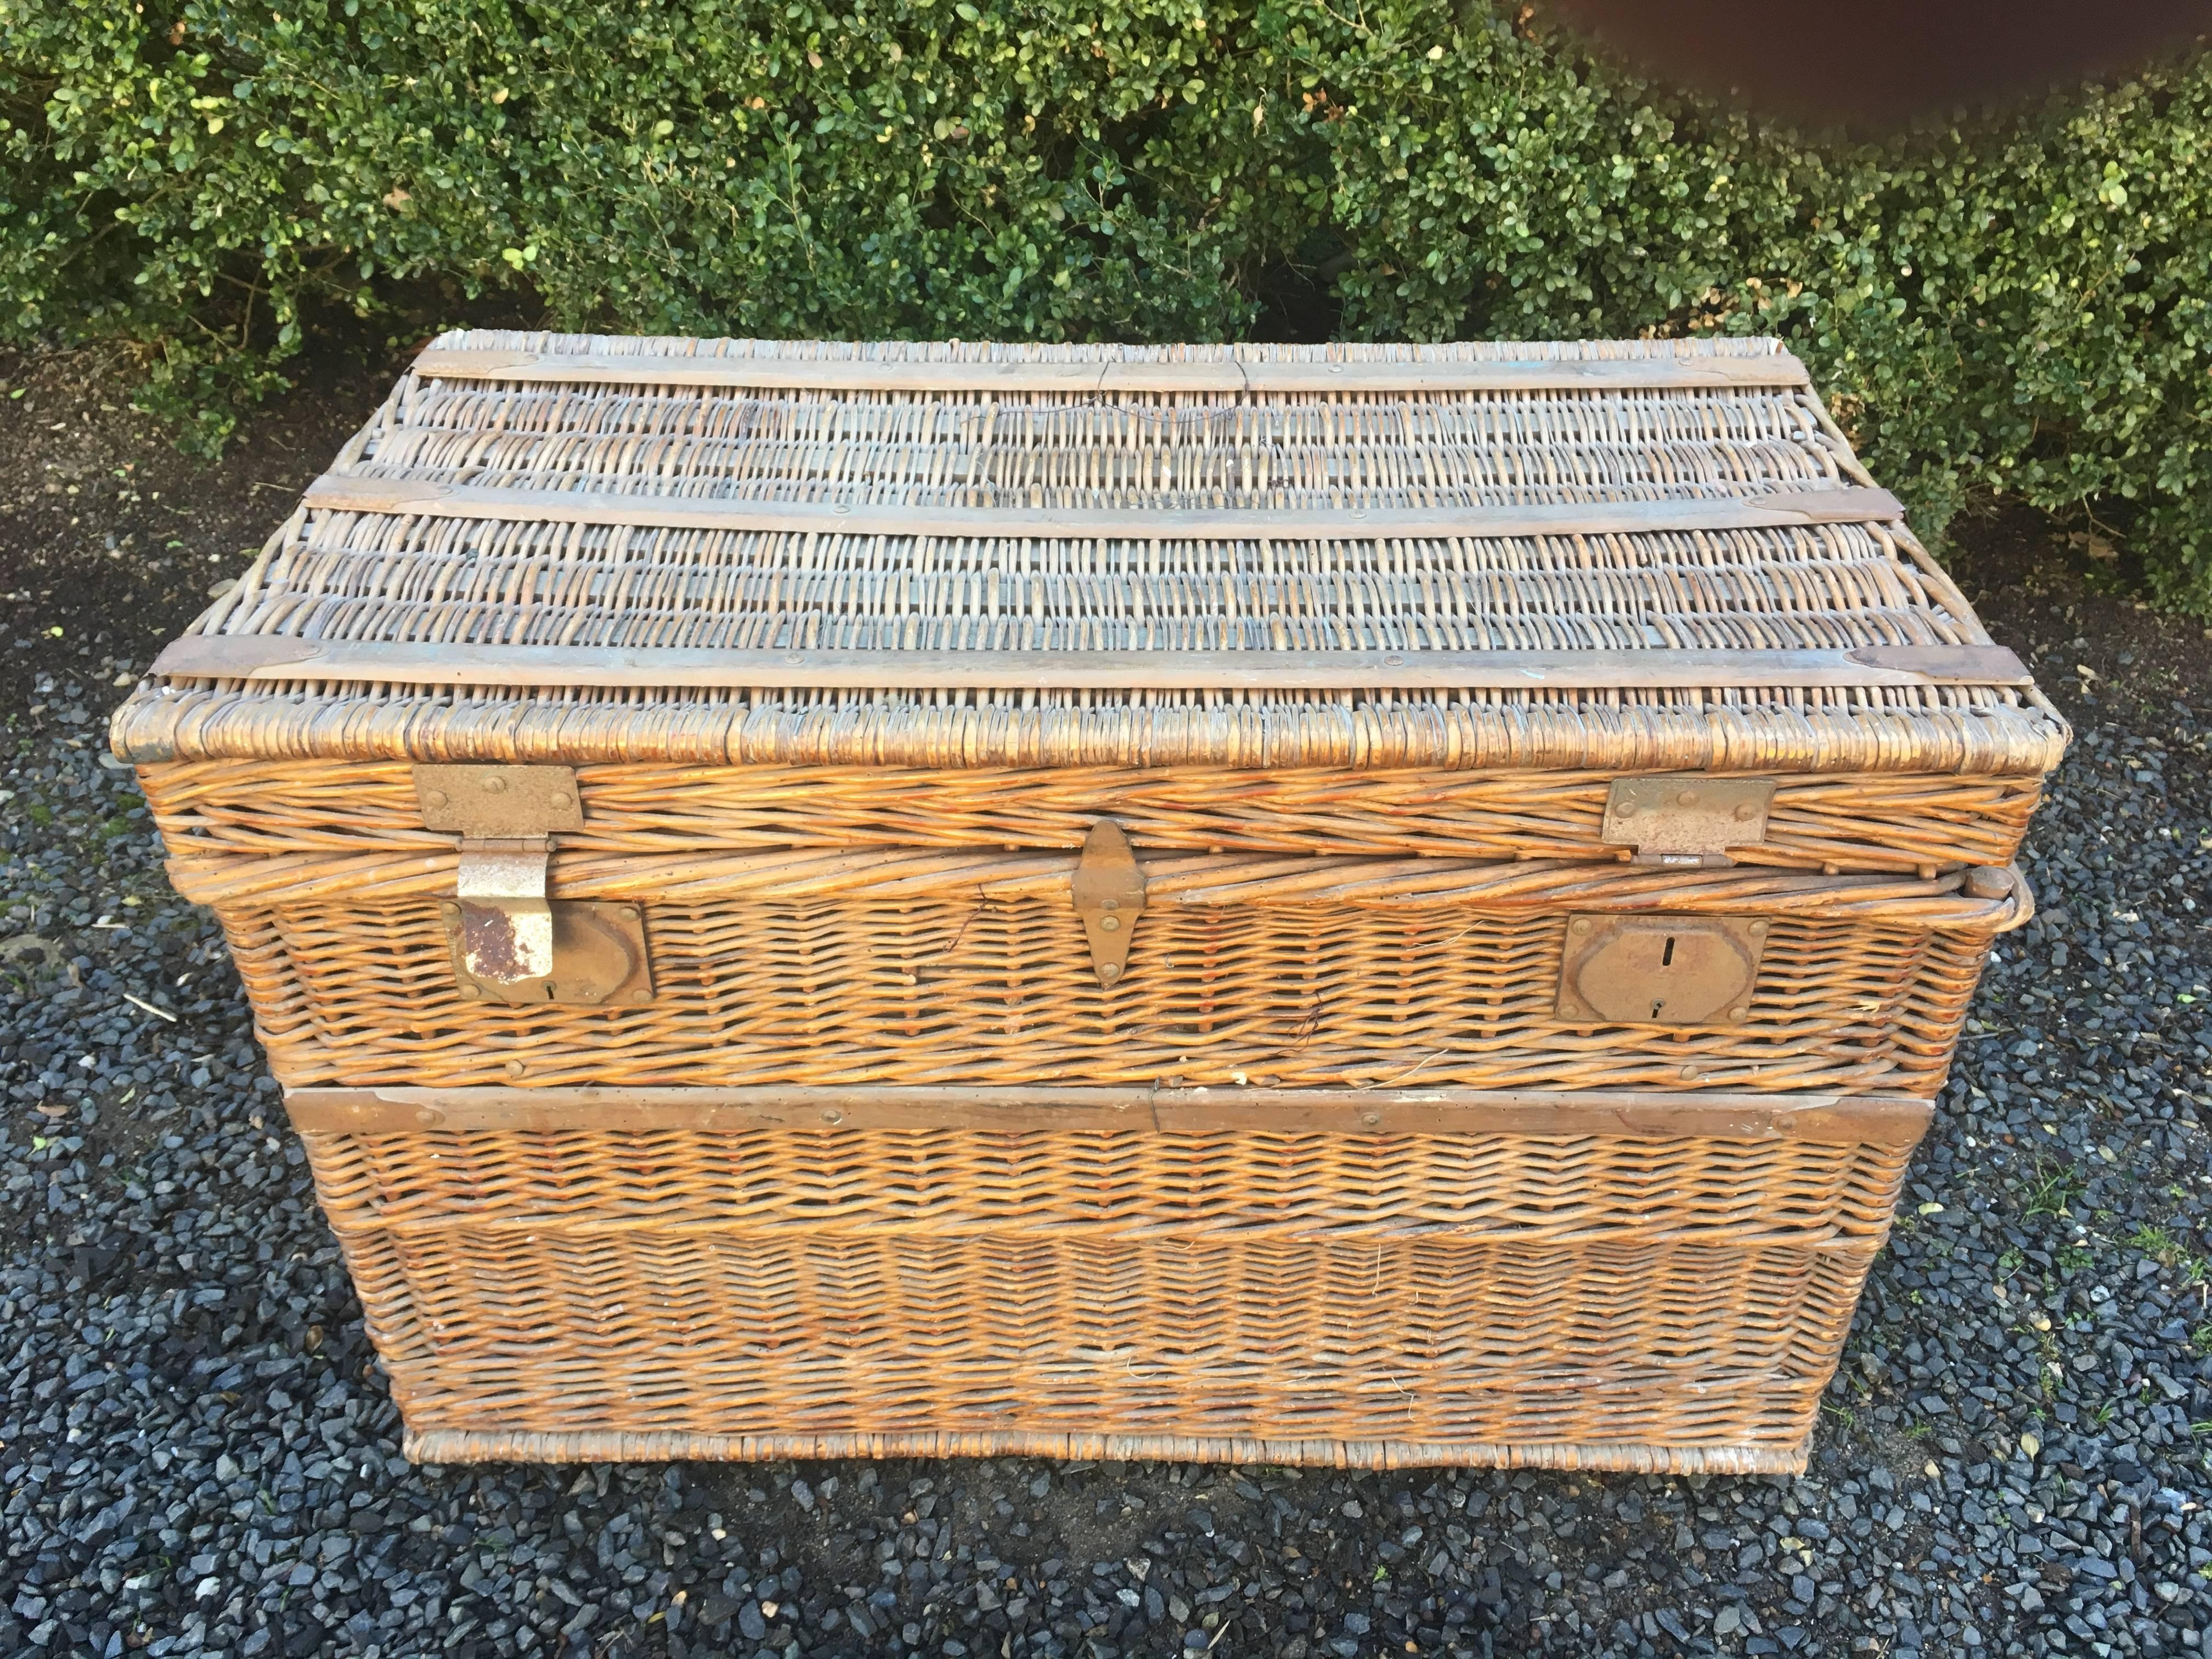 This commodious wicker trunk is a standout and features its original lining and handmade interior tray. Perfect for keeping those messy mudrooms tidy, or as a coffee table with storage. Overall in excellent condition, the lining has browned a bit